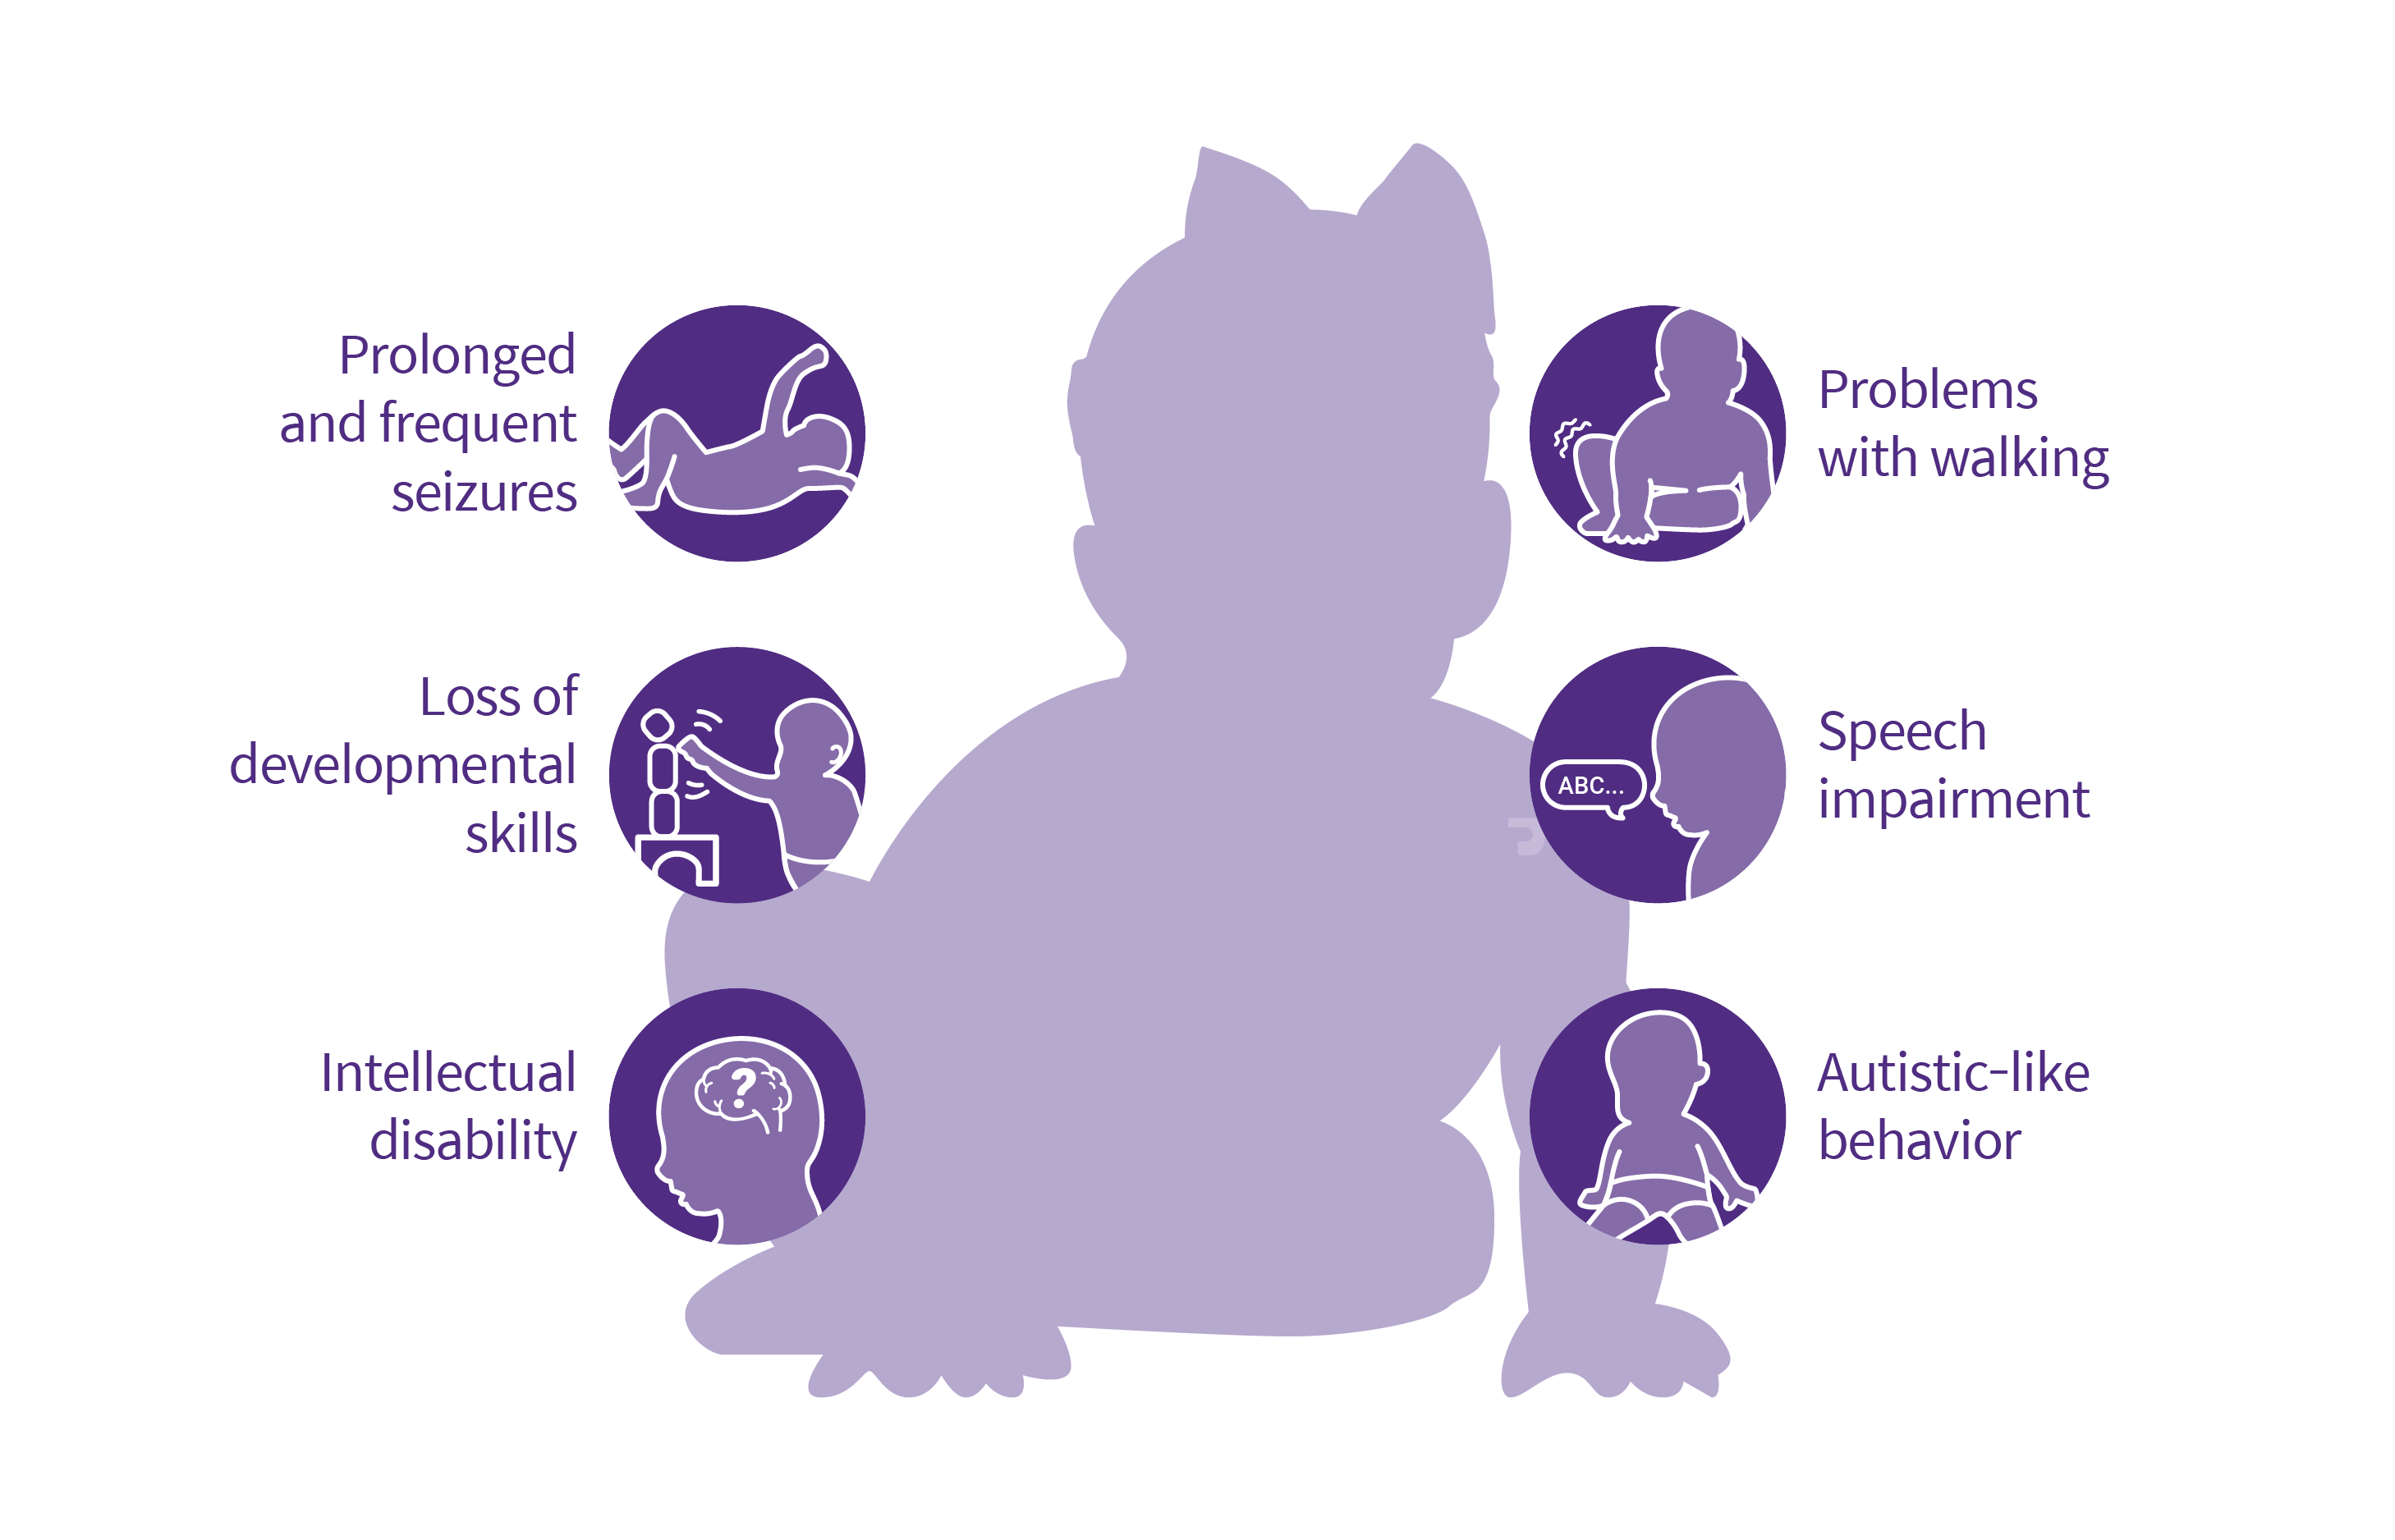 Six symptoms of Dravet syndrome: Prolonged and frequent seizures, loss of developmental skills, intellectual disability, problems with walking, speech impairment, autistic-like behavior